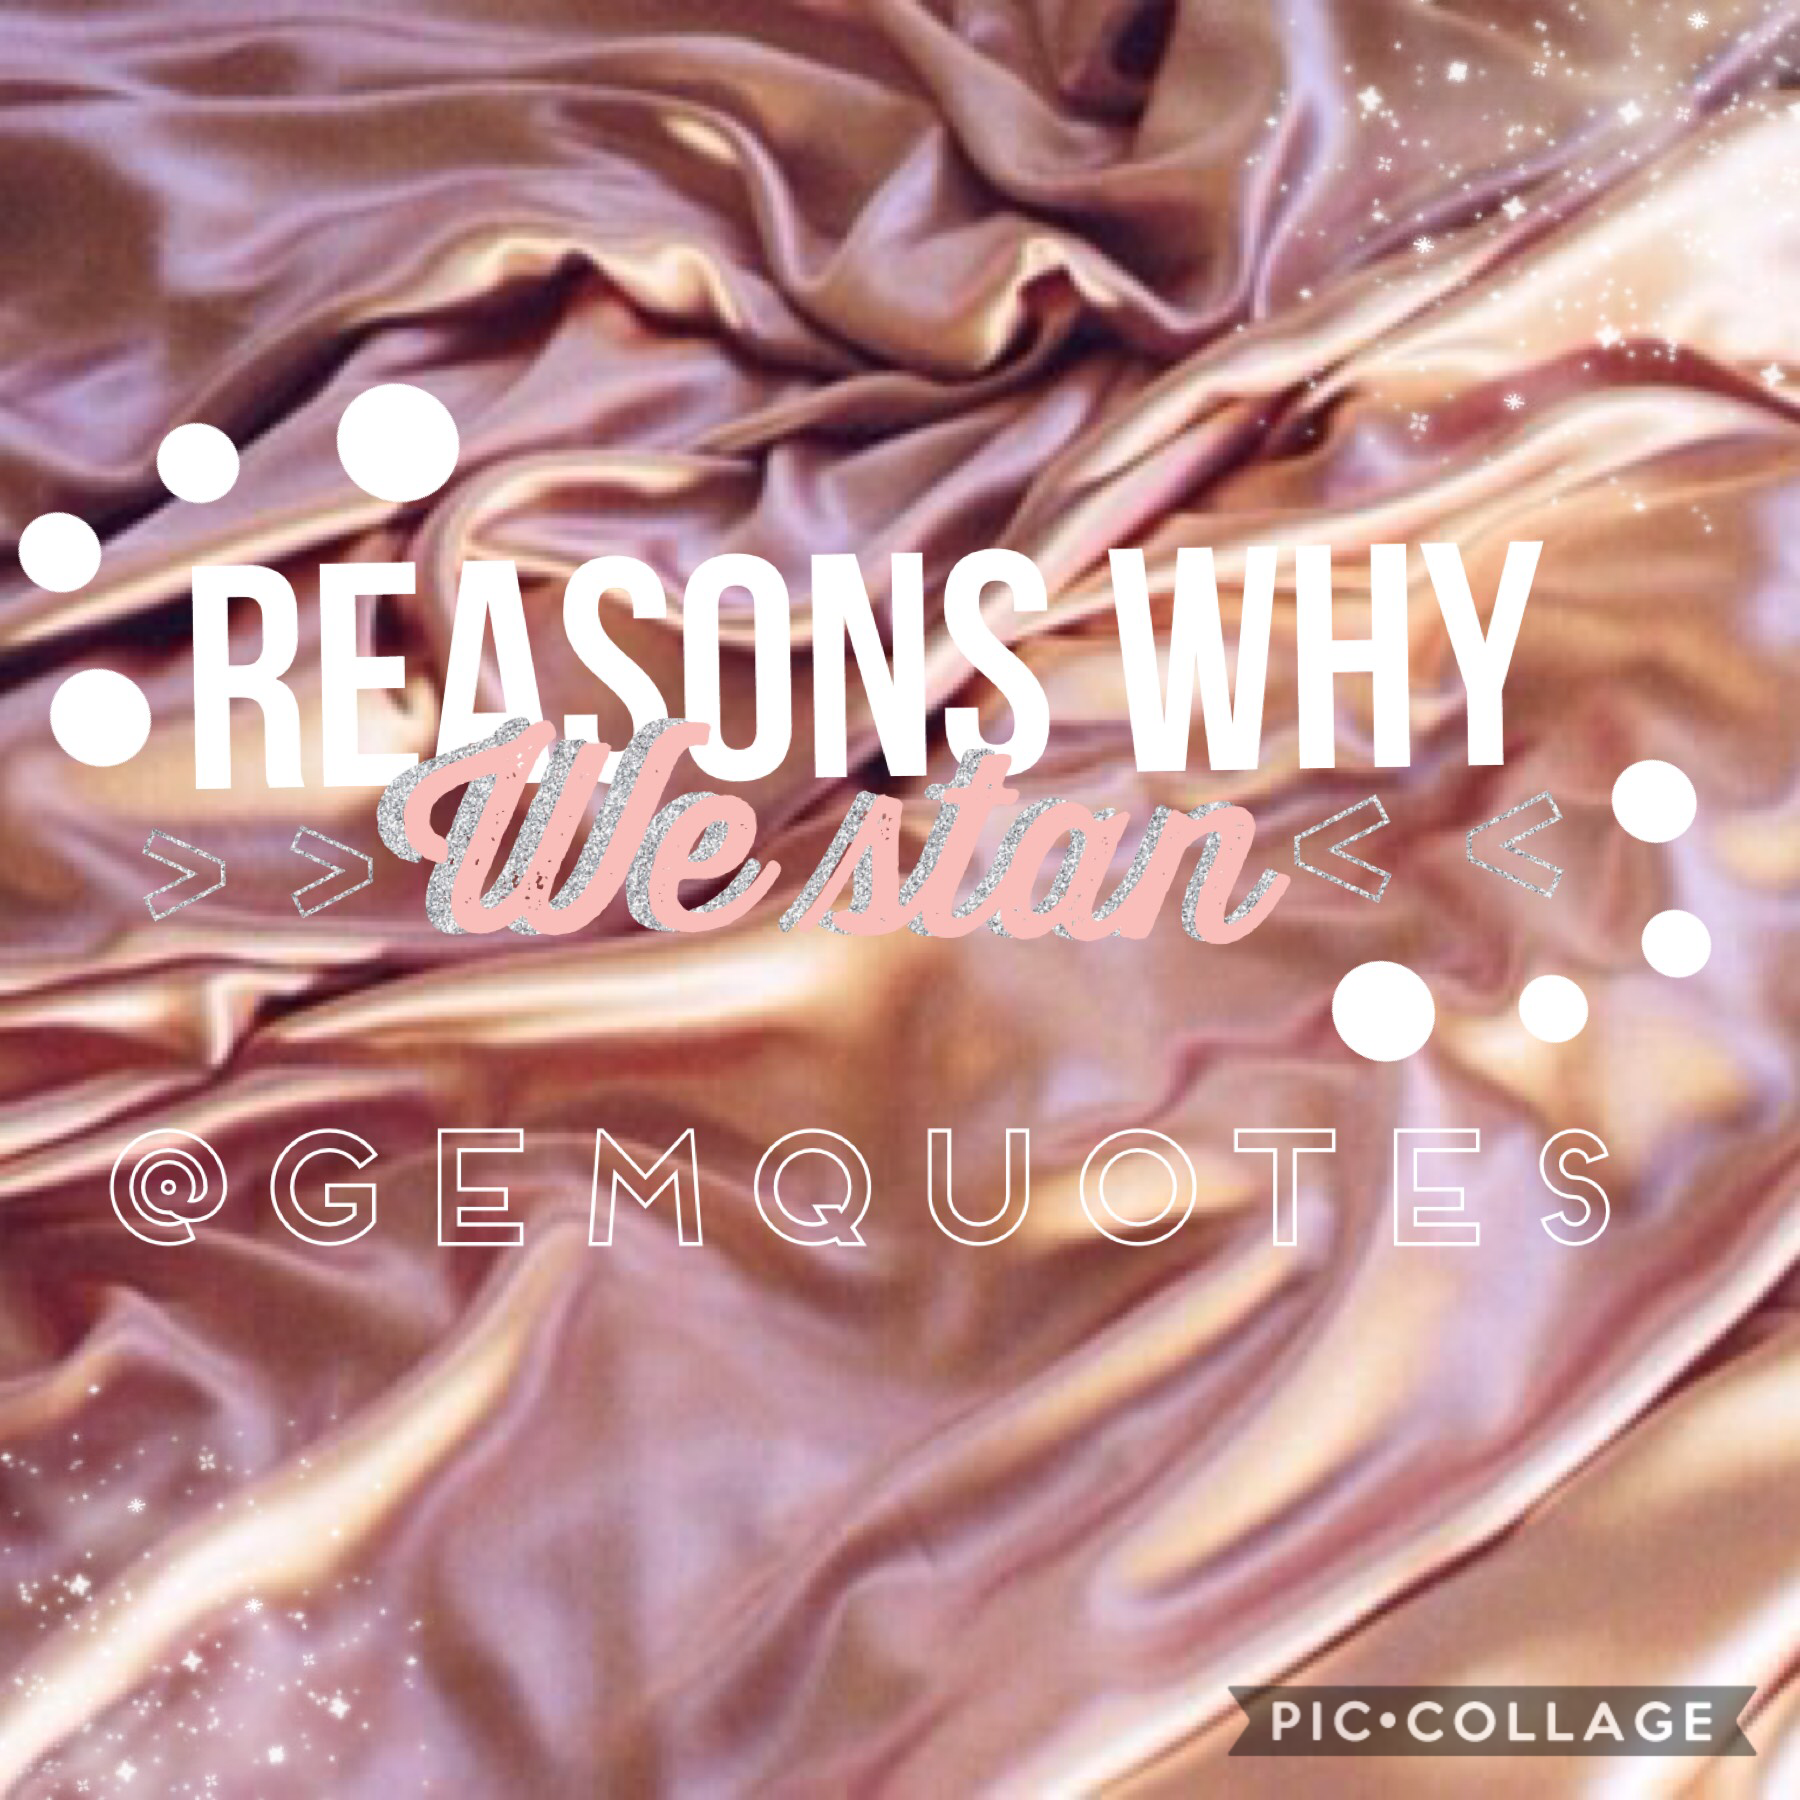 TAPPP✨
Hi so I made this fanpage becuase @gemquotes is a legend and she’s v creative and she deserves this💓🏹👼🏼 we love you queen💓💓✨✨✨👑👑my main is @angelduhst 